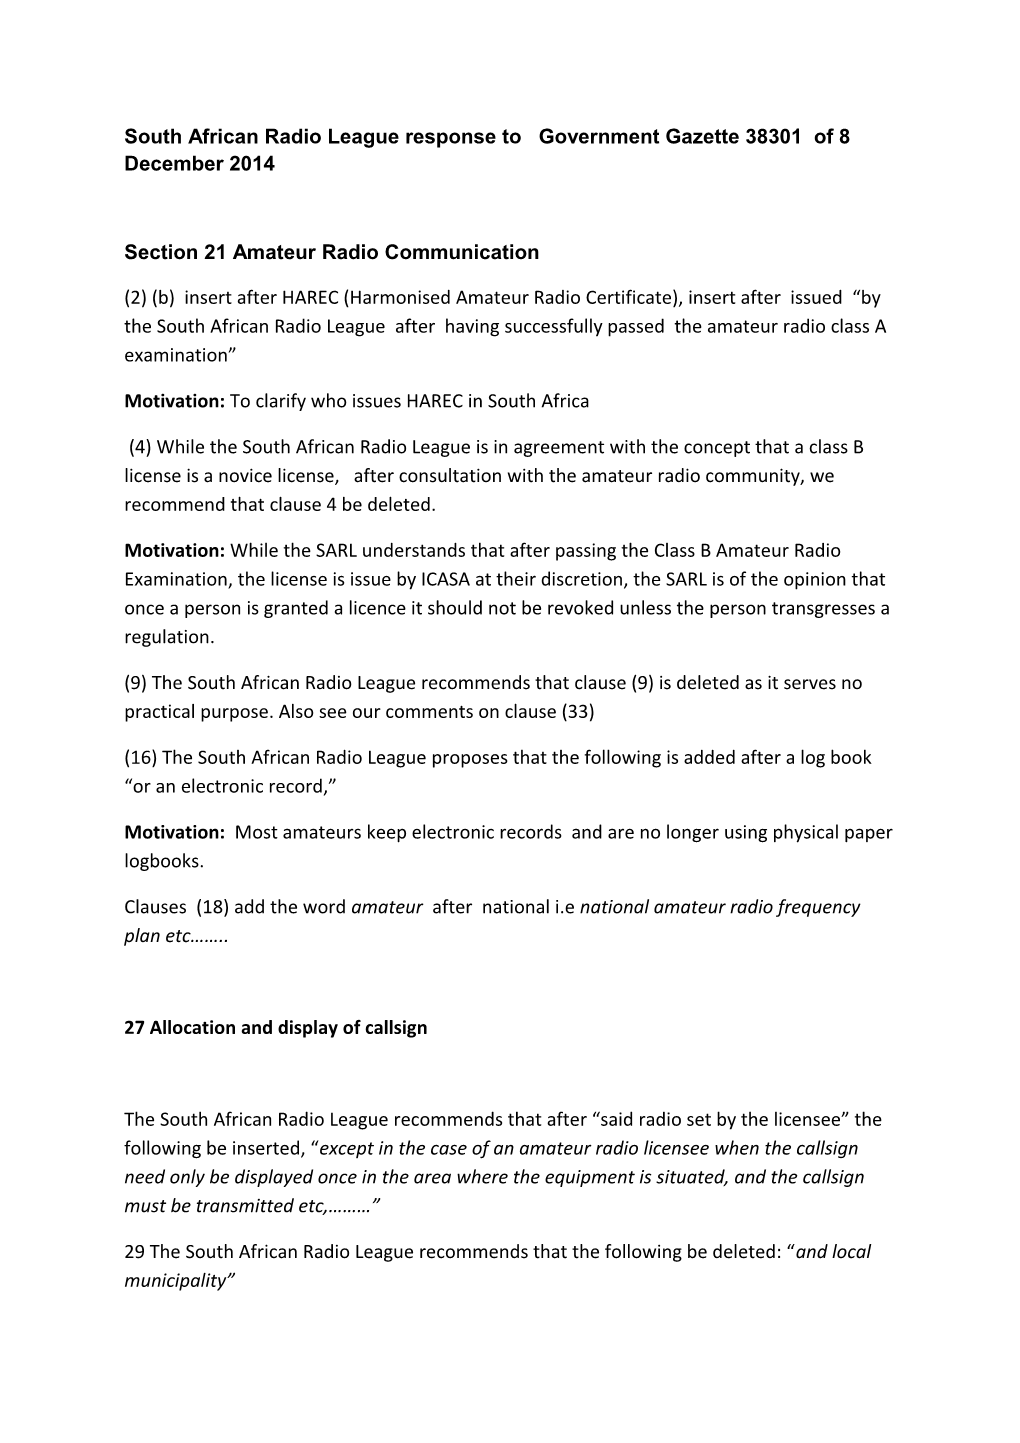 South African Radio League Response to Government Gazette 38301 Of8 December 2014